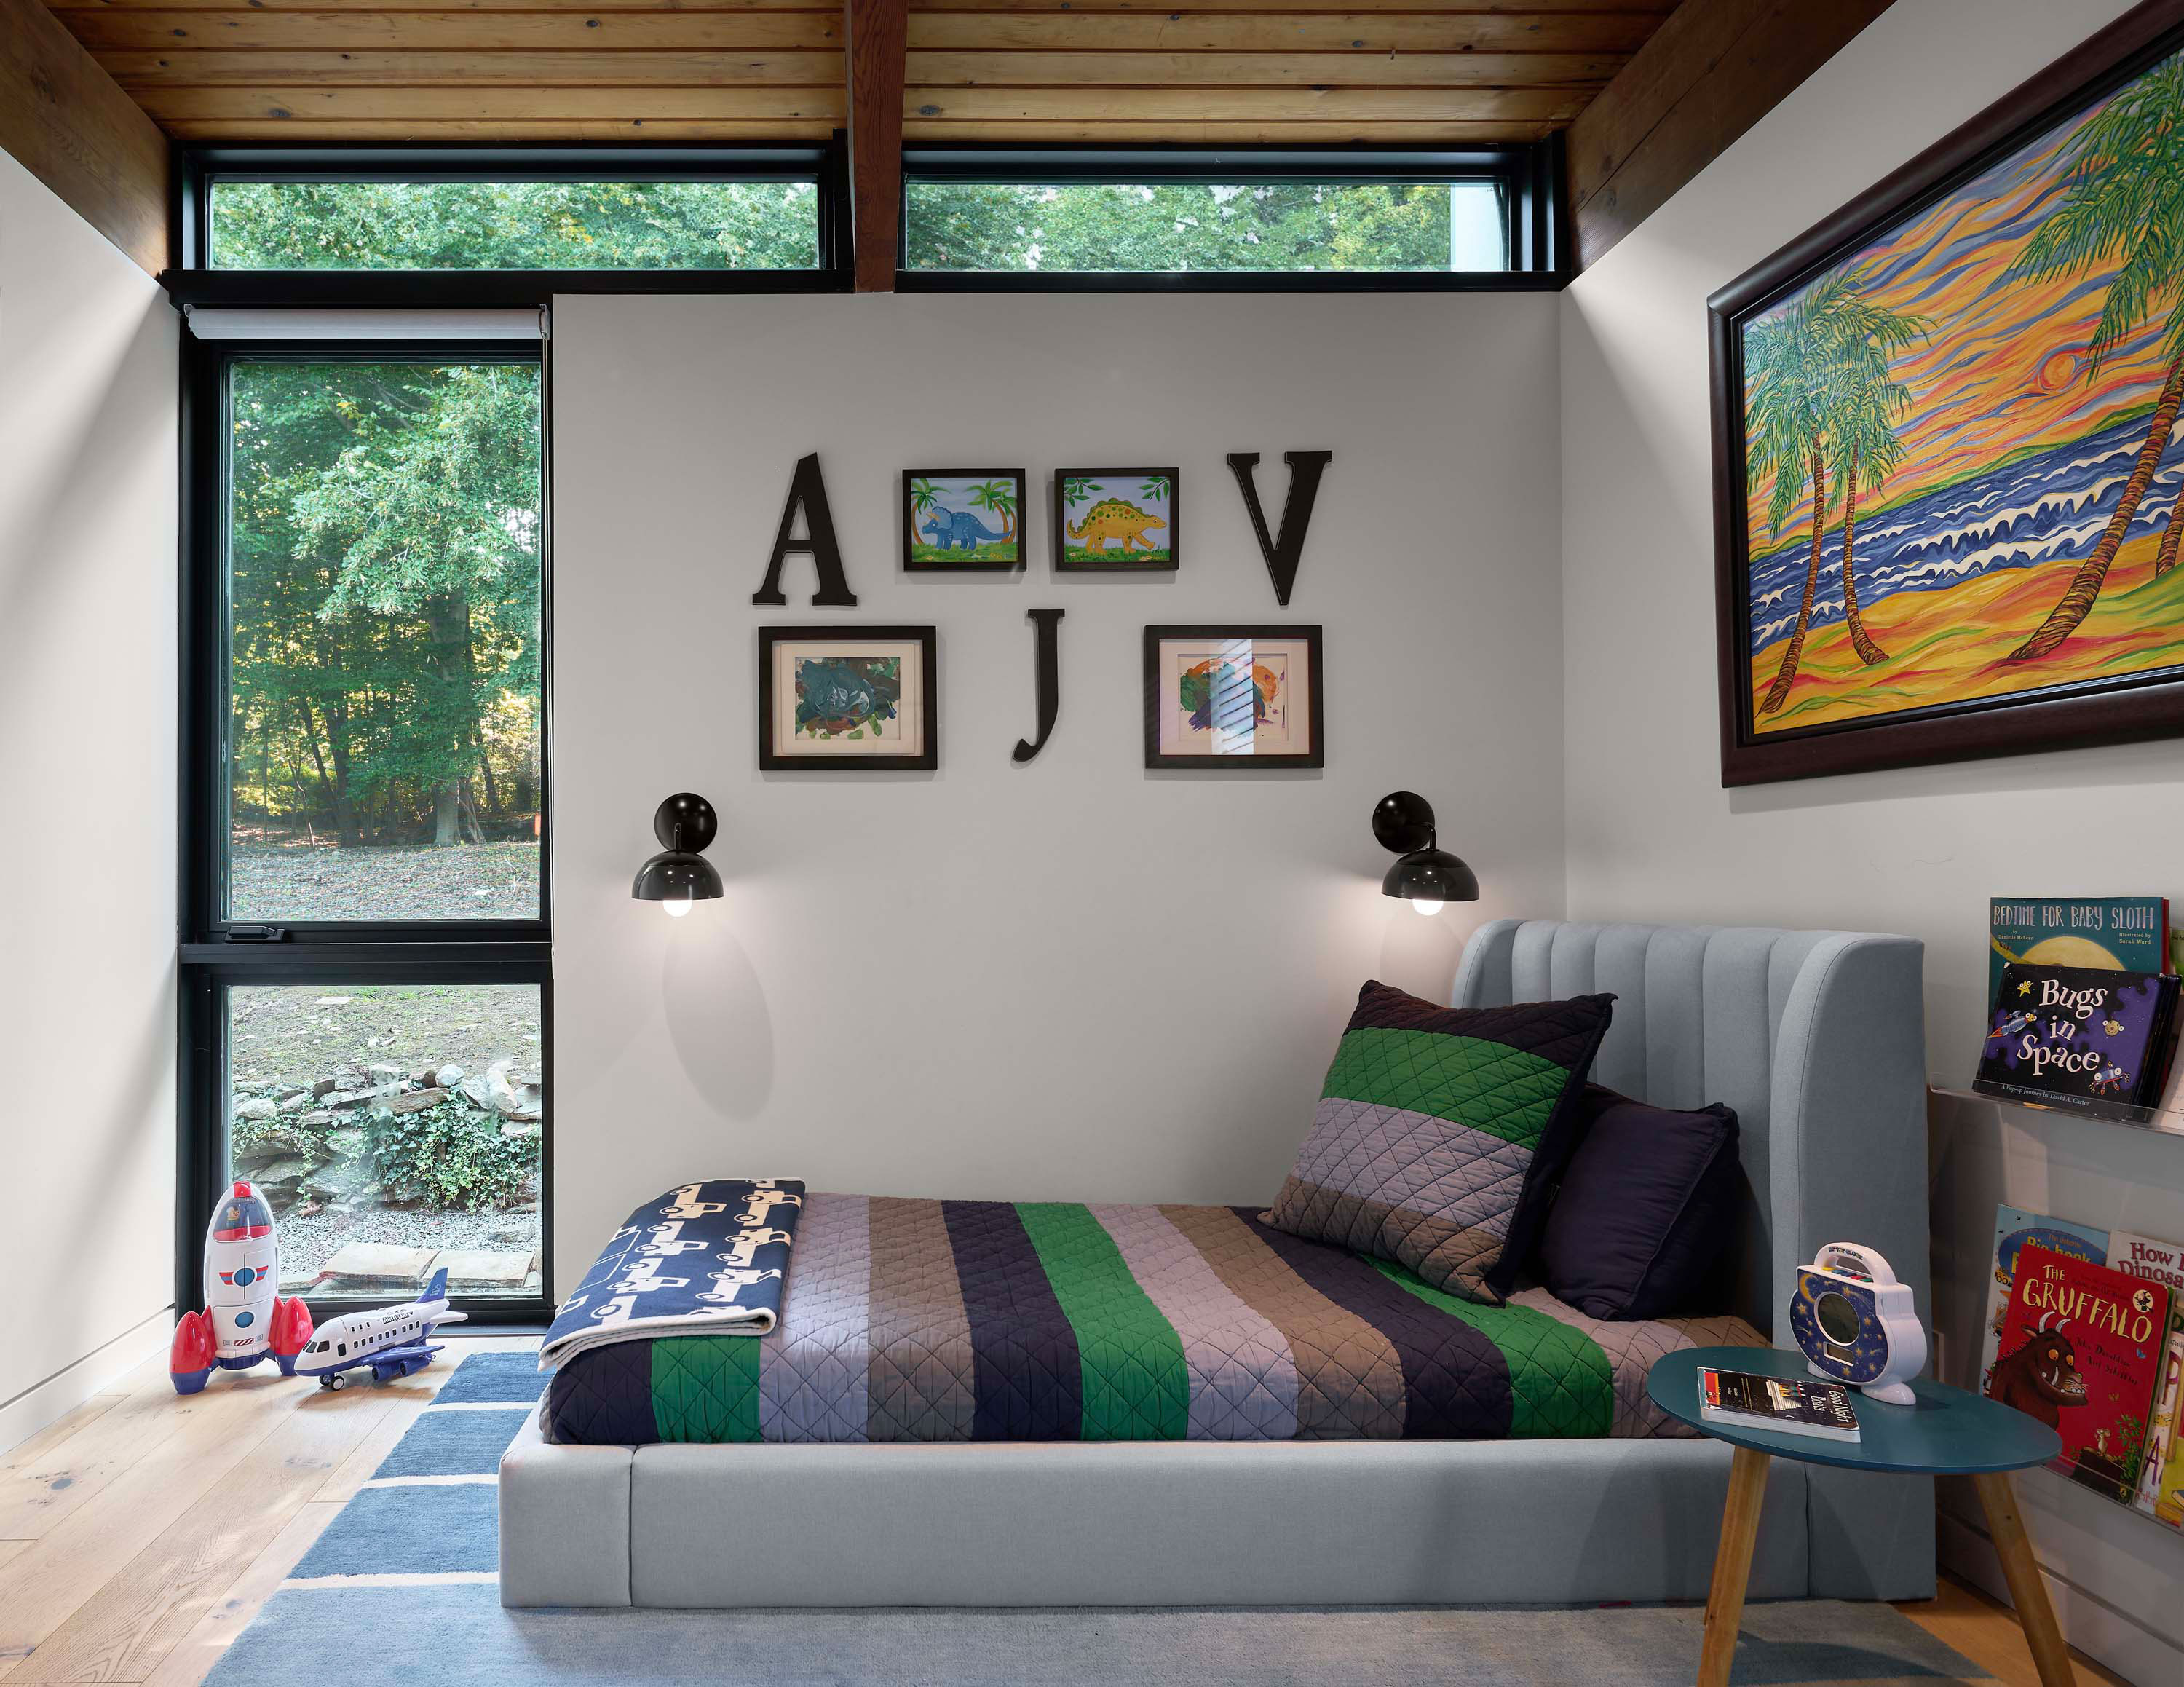 Bedroom of Pelham Manor by Specht Novak Architects showcasing the colorful interior connected visually to the exterior by ample modern windows. Shot by Dror Baldinger.